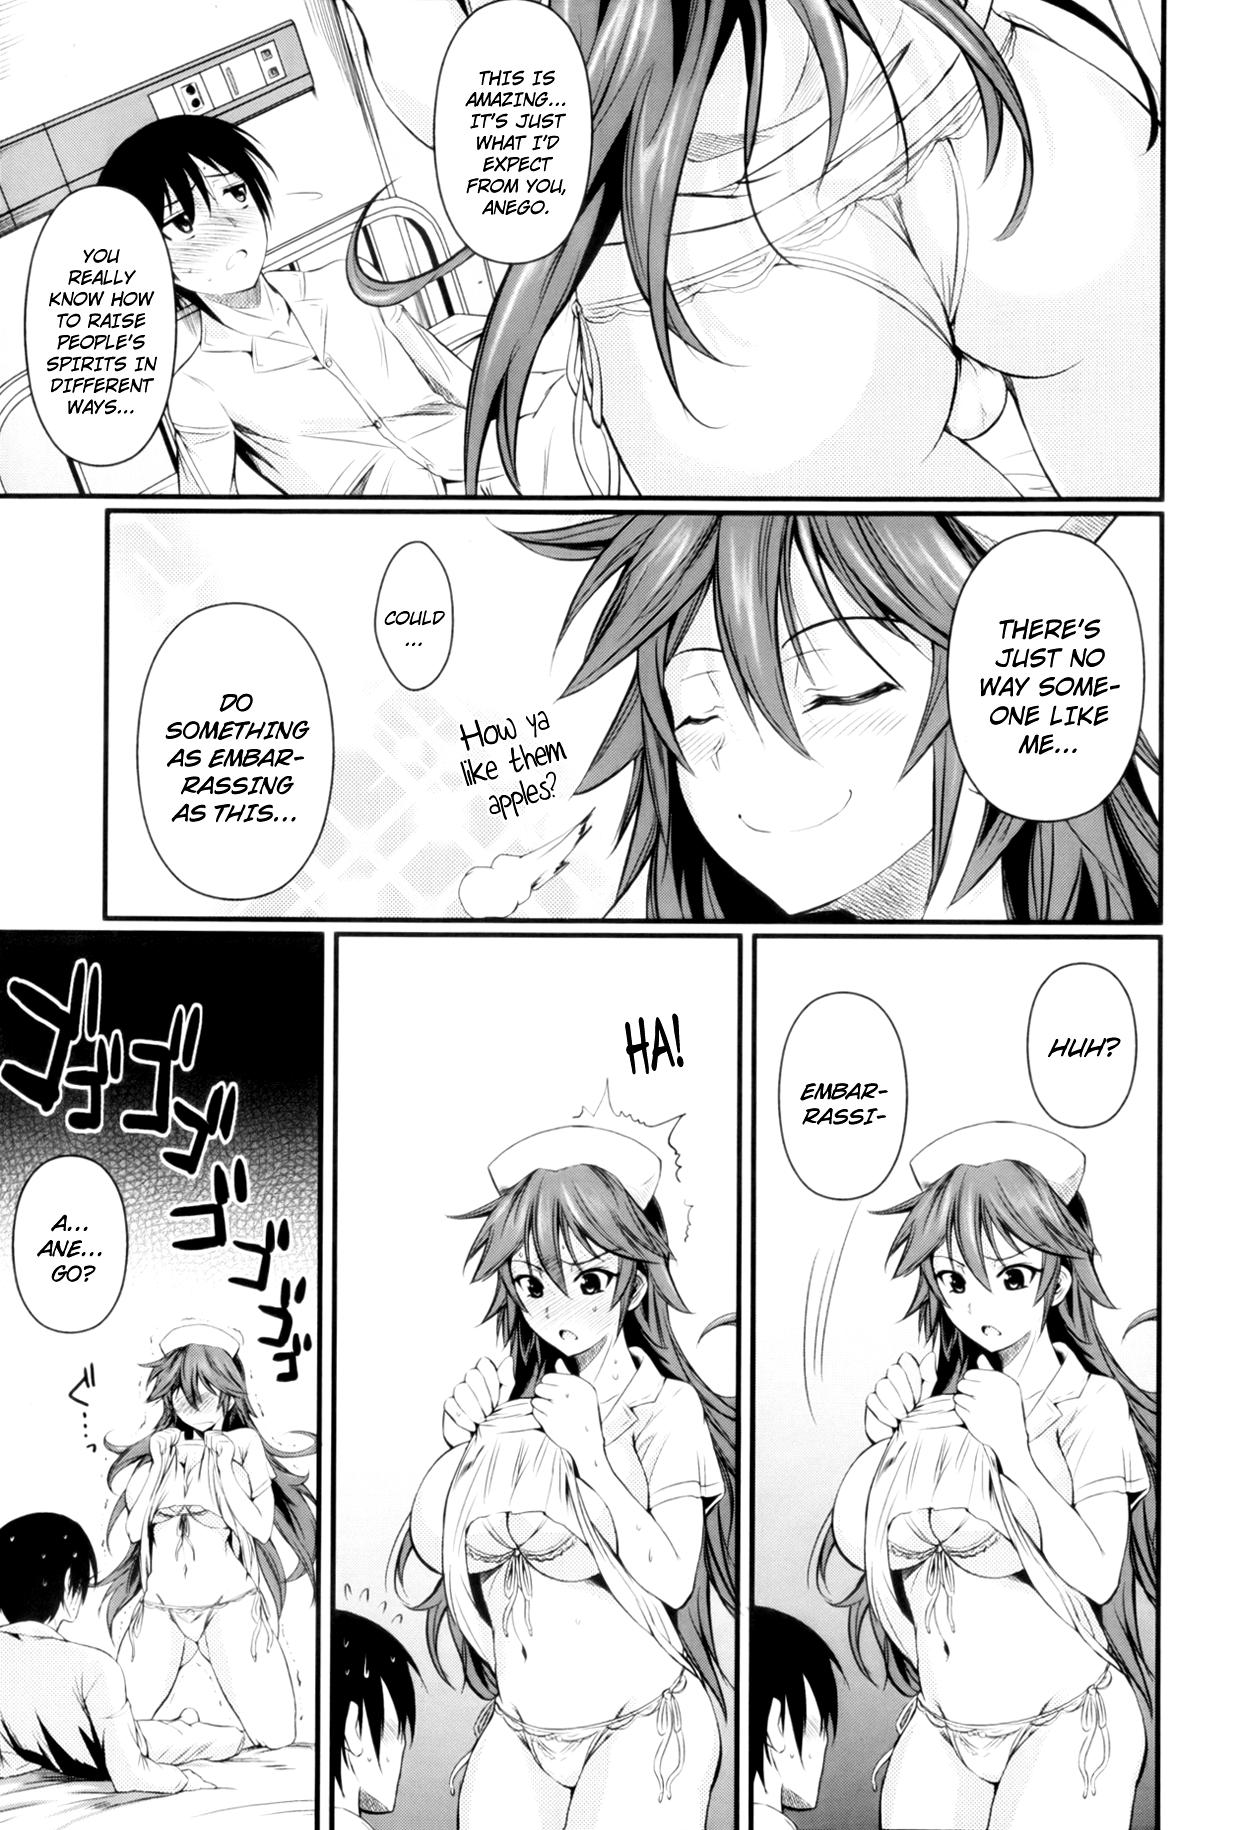 Groupsex Tenshi na Anego | An Angelic Anego Screaming - Page 5